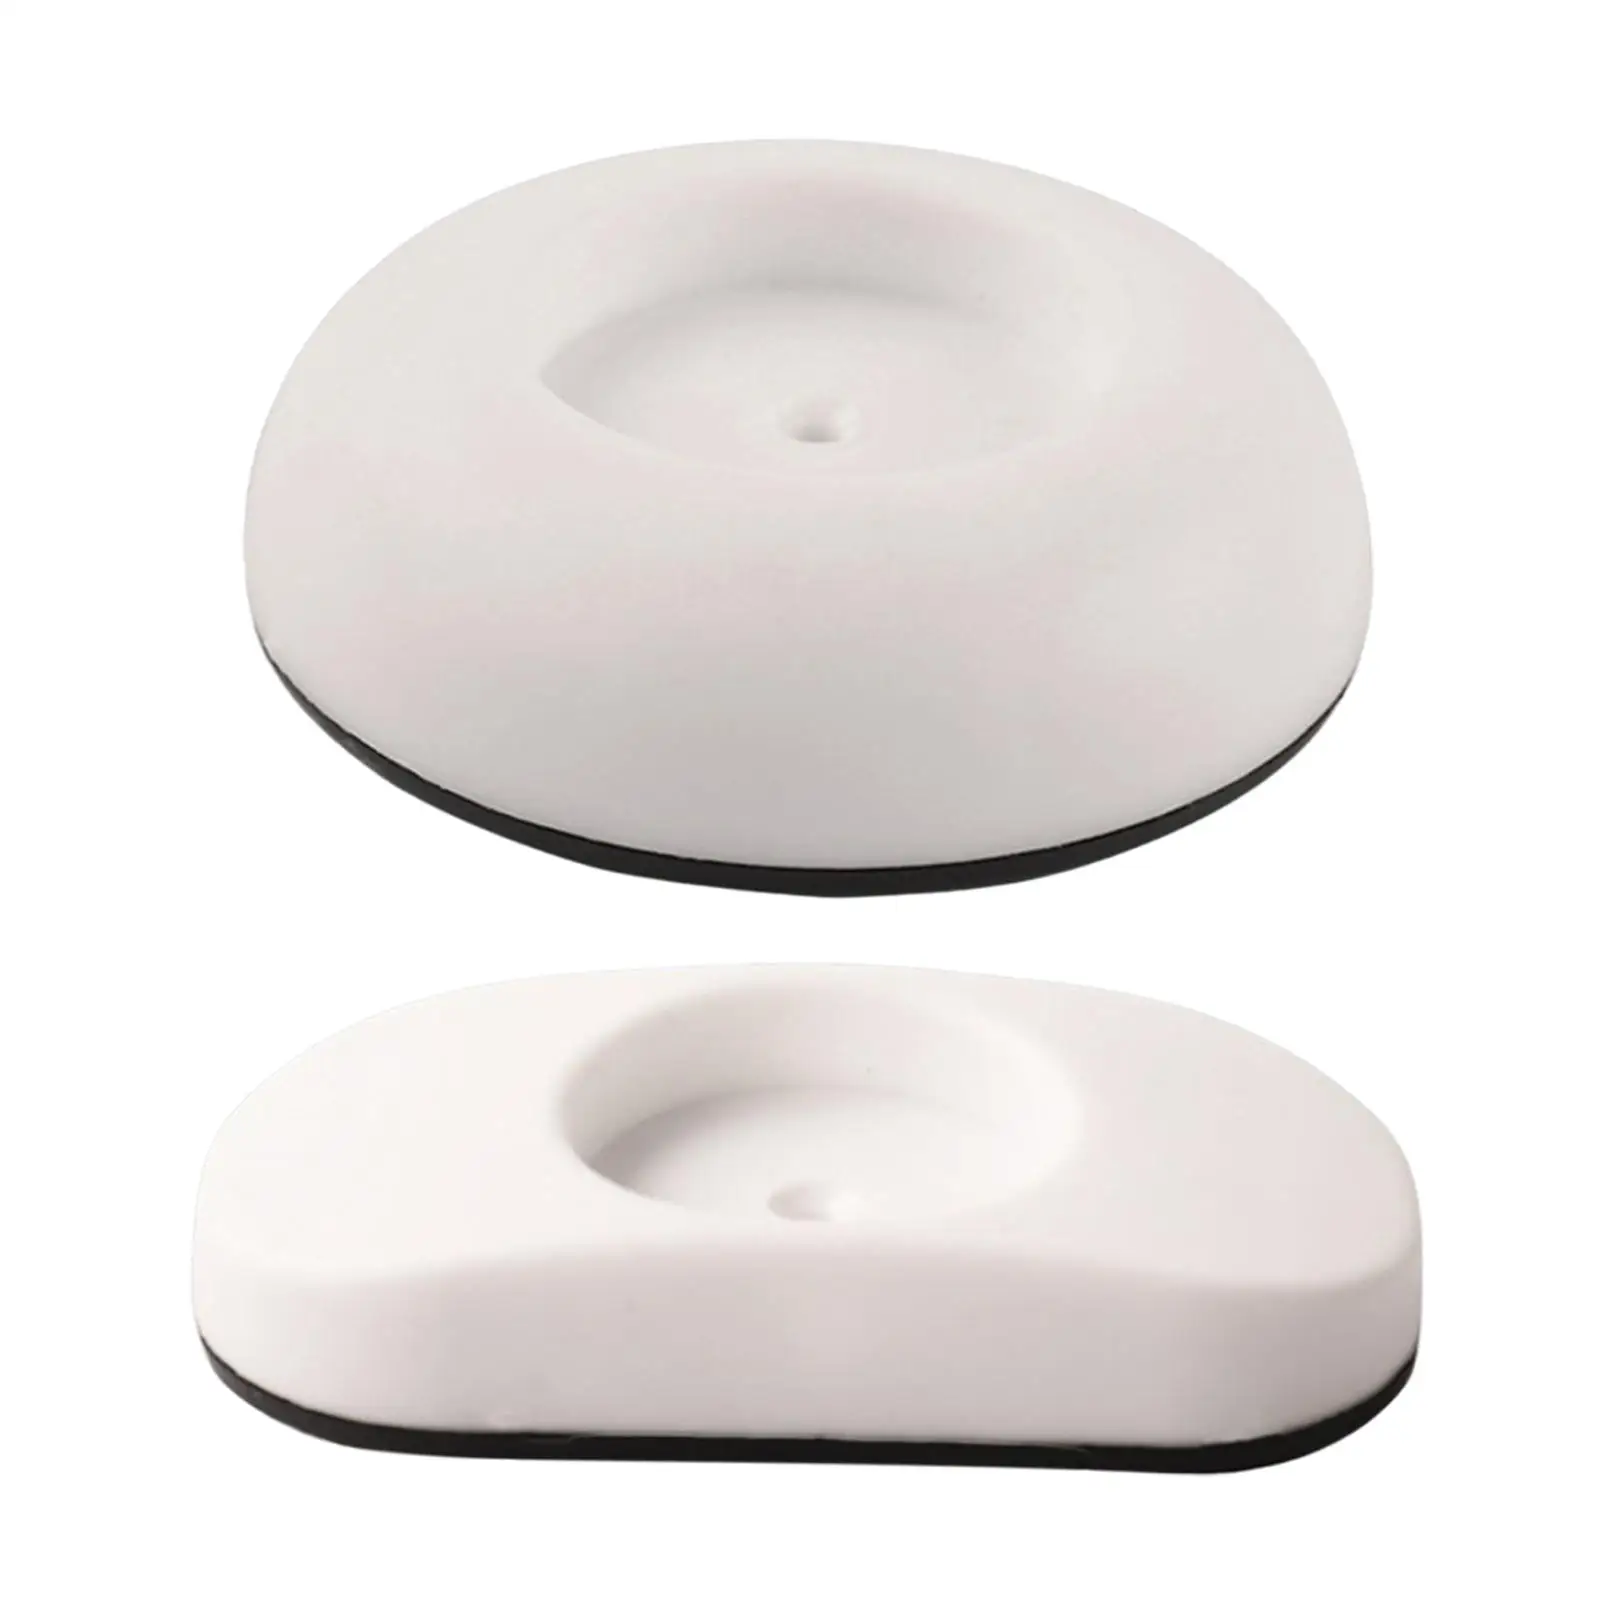 Small Gate Wall Protector Protect Walls Wall Cups for Stair Gate Indoor Gate